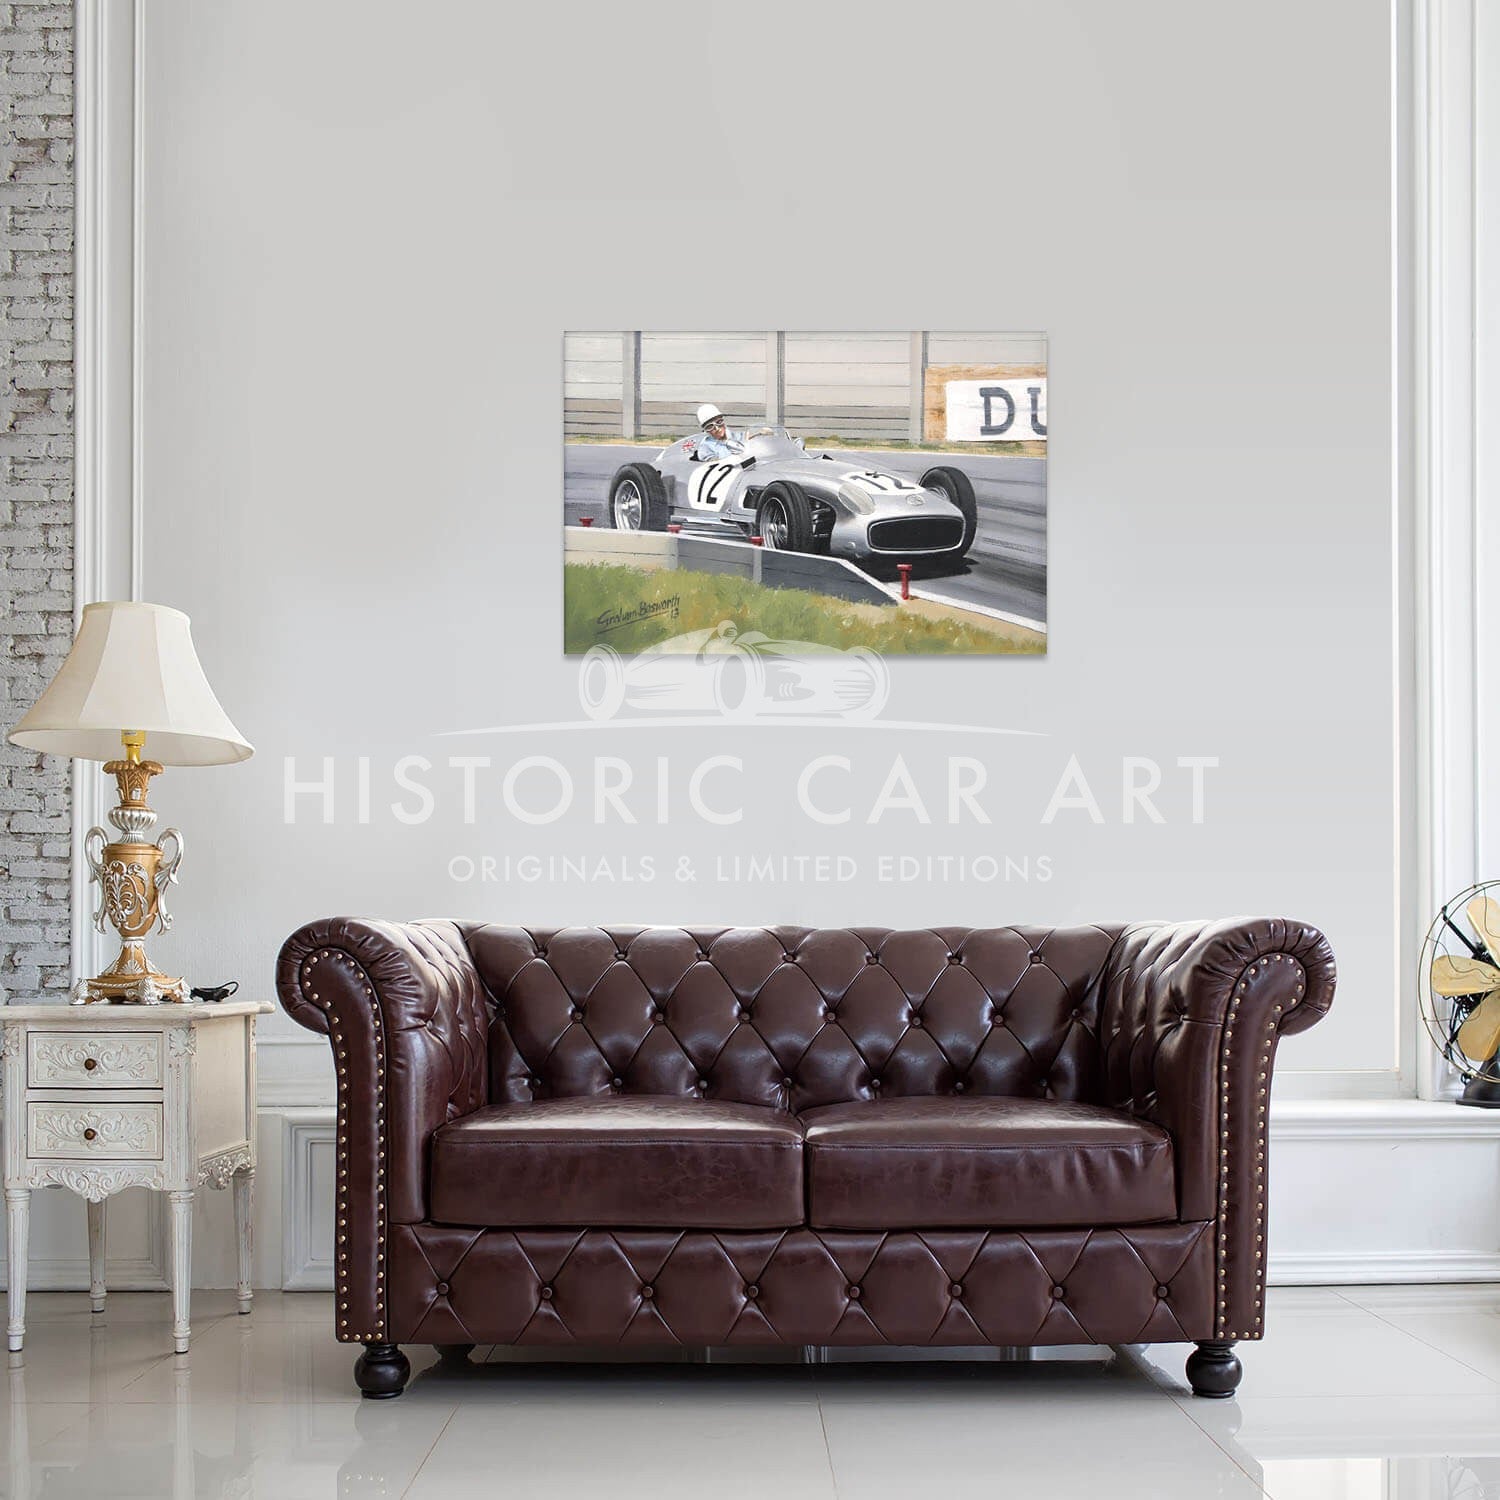 Masters at Work | Moss and Mercedes | Art Print